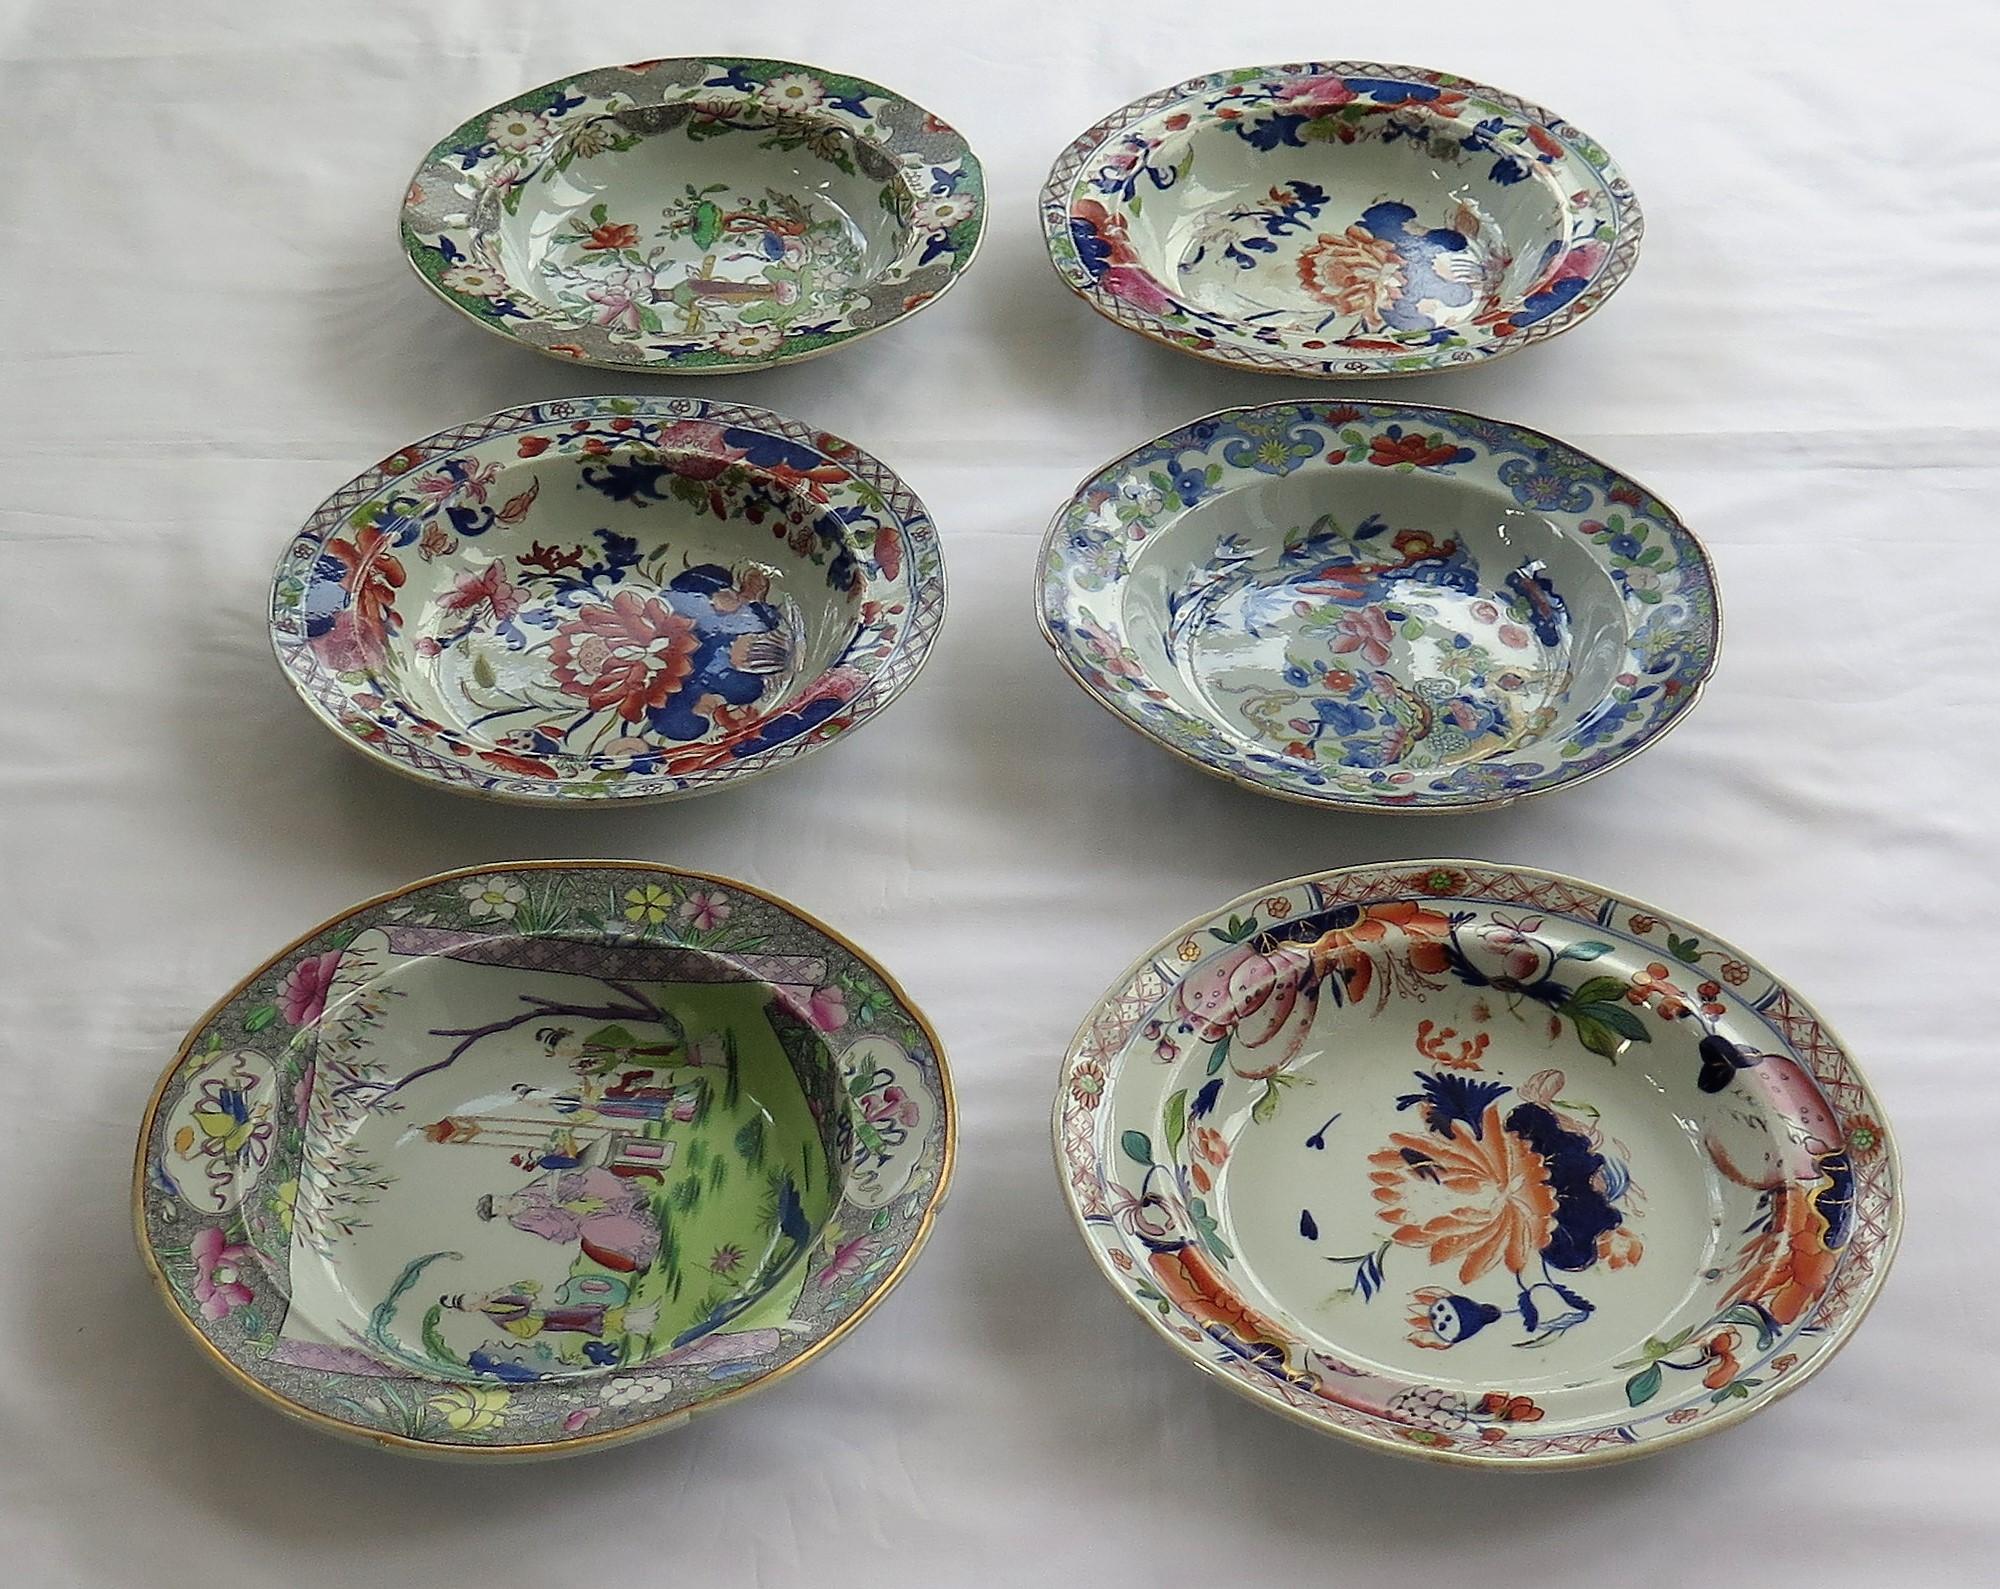 This is a harlequin set of six Mason's Ironstone soup plates or bowls, all dating to the earliest recorded George 3rd period between 1813 and 1820.

These large soup bowls or plates compliment the large Mason's dinner plates we also have listed